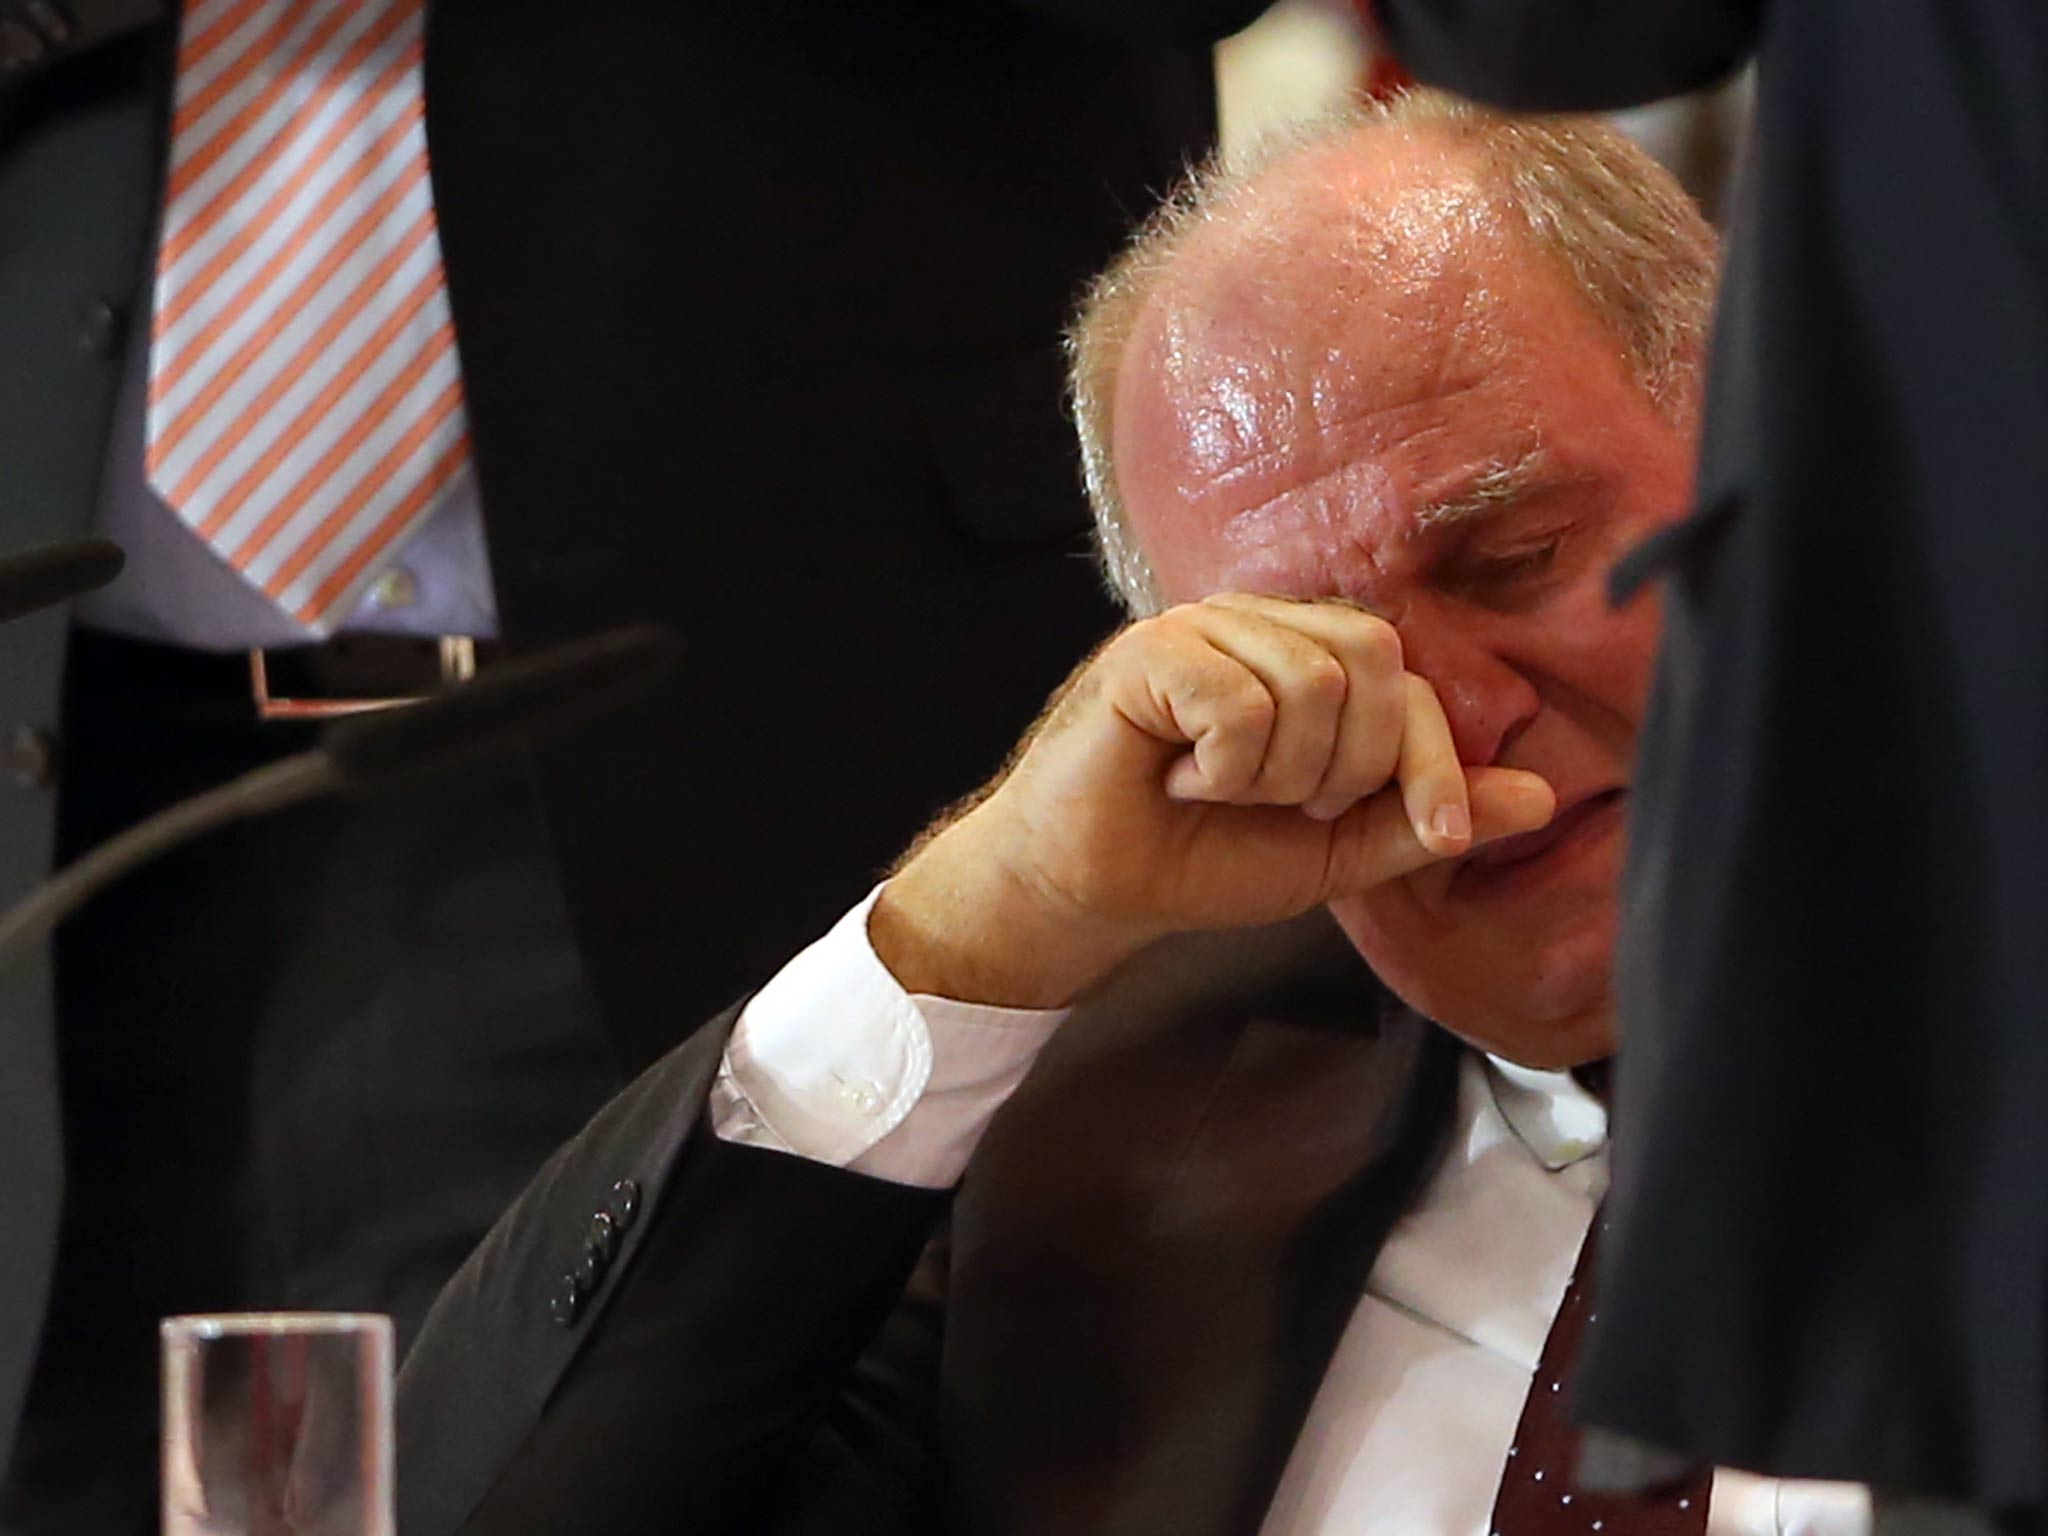 Bayern Munich president Uli Hoeness is reduced to tears at the club's annual general meeting 